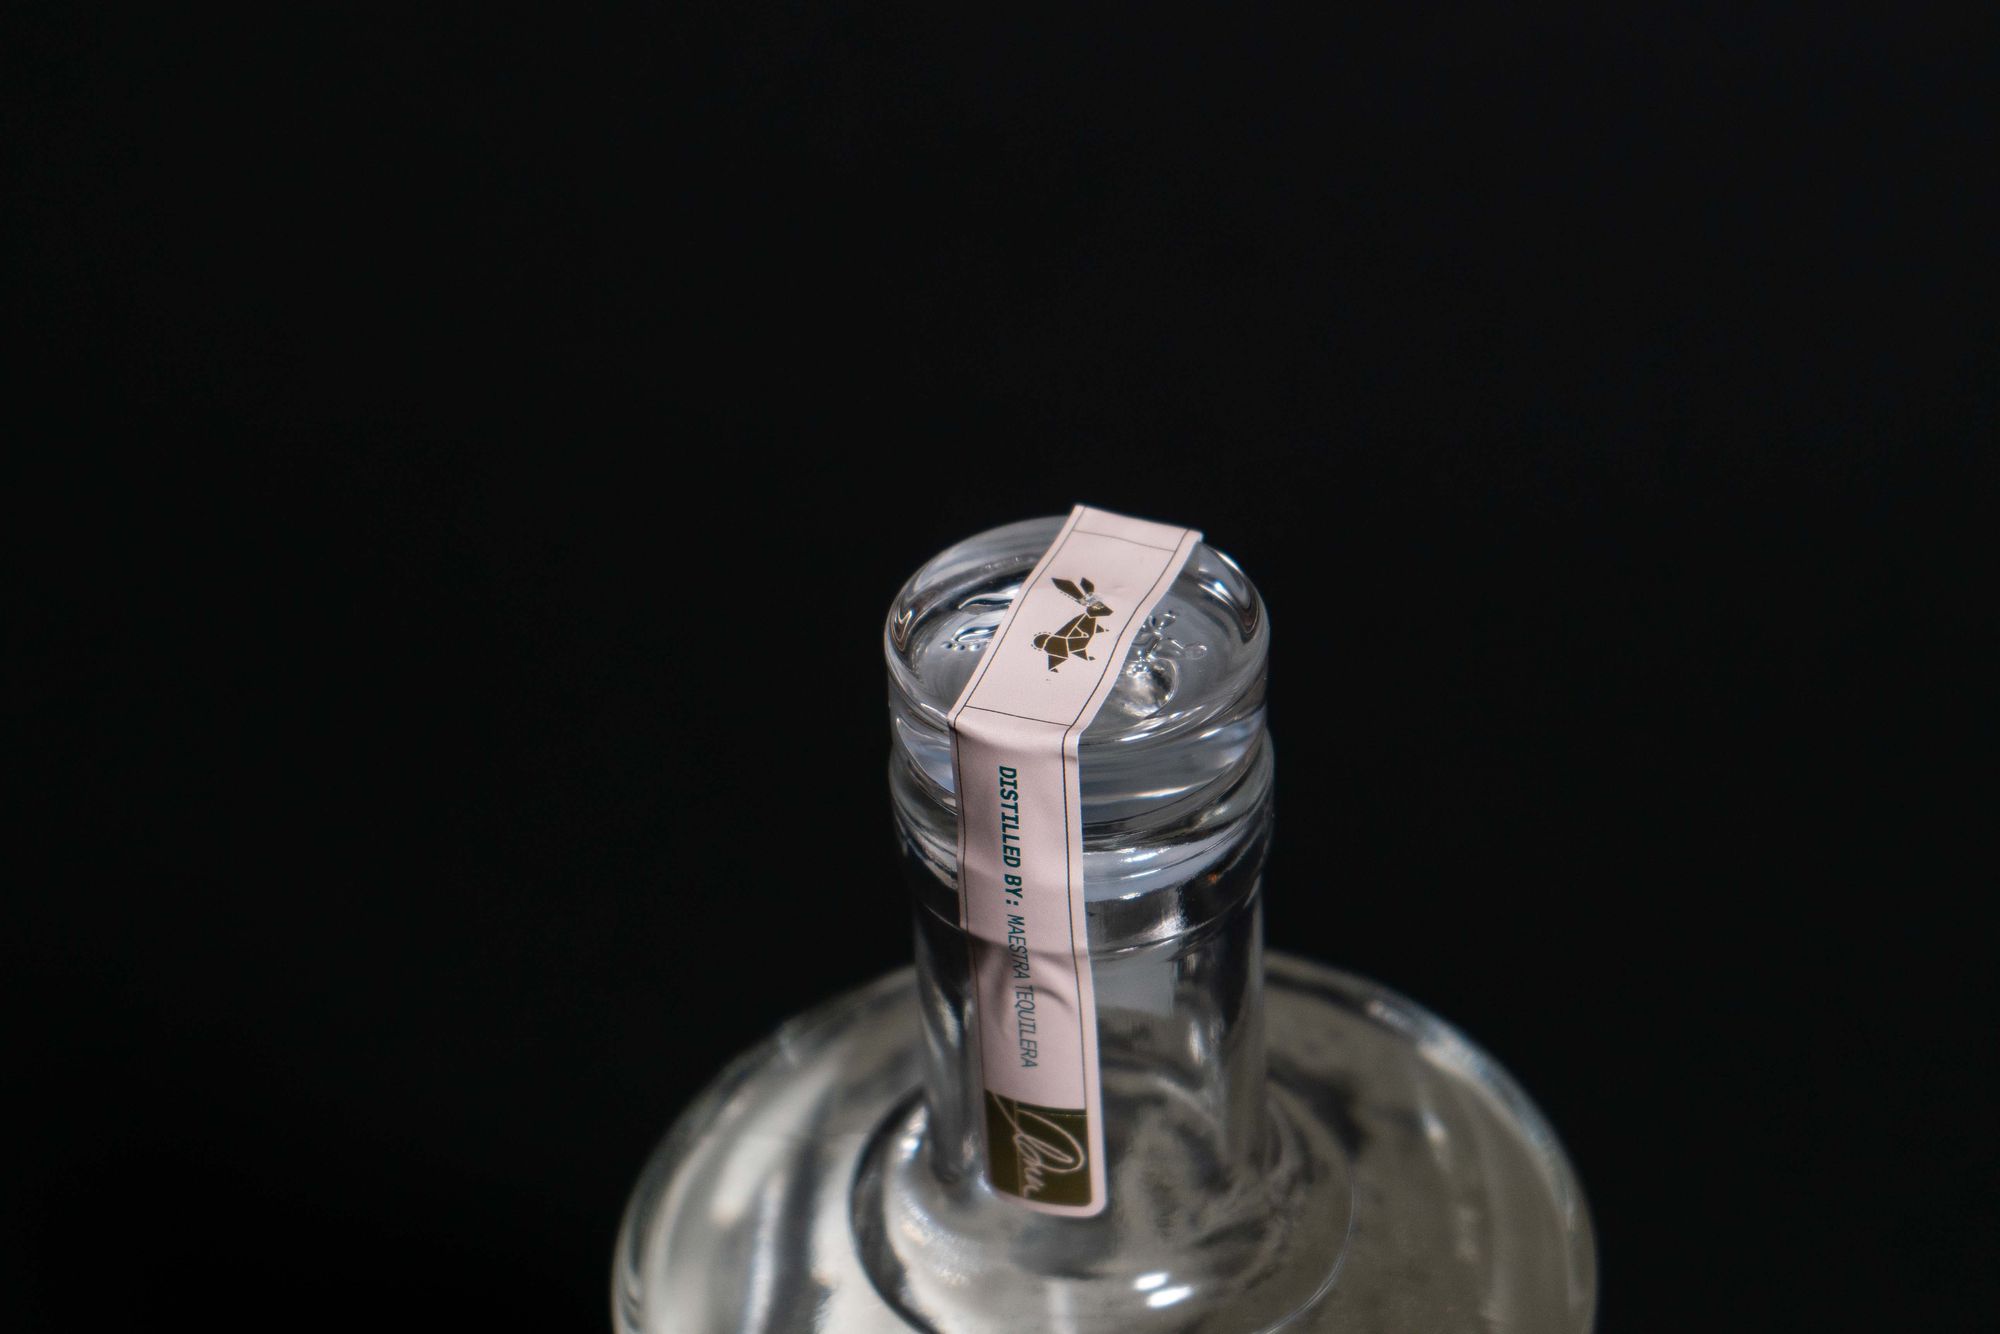 The glass stopper closure for Mijenta Tequila. Photo: Boothby